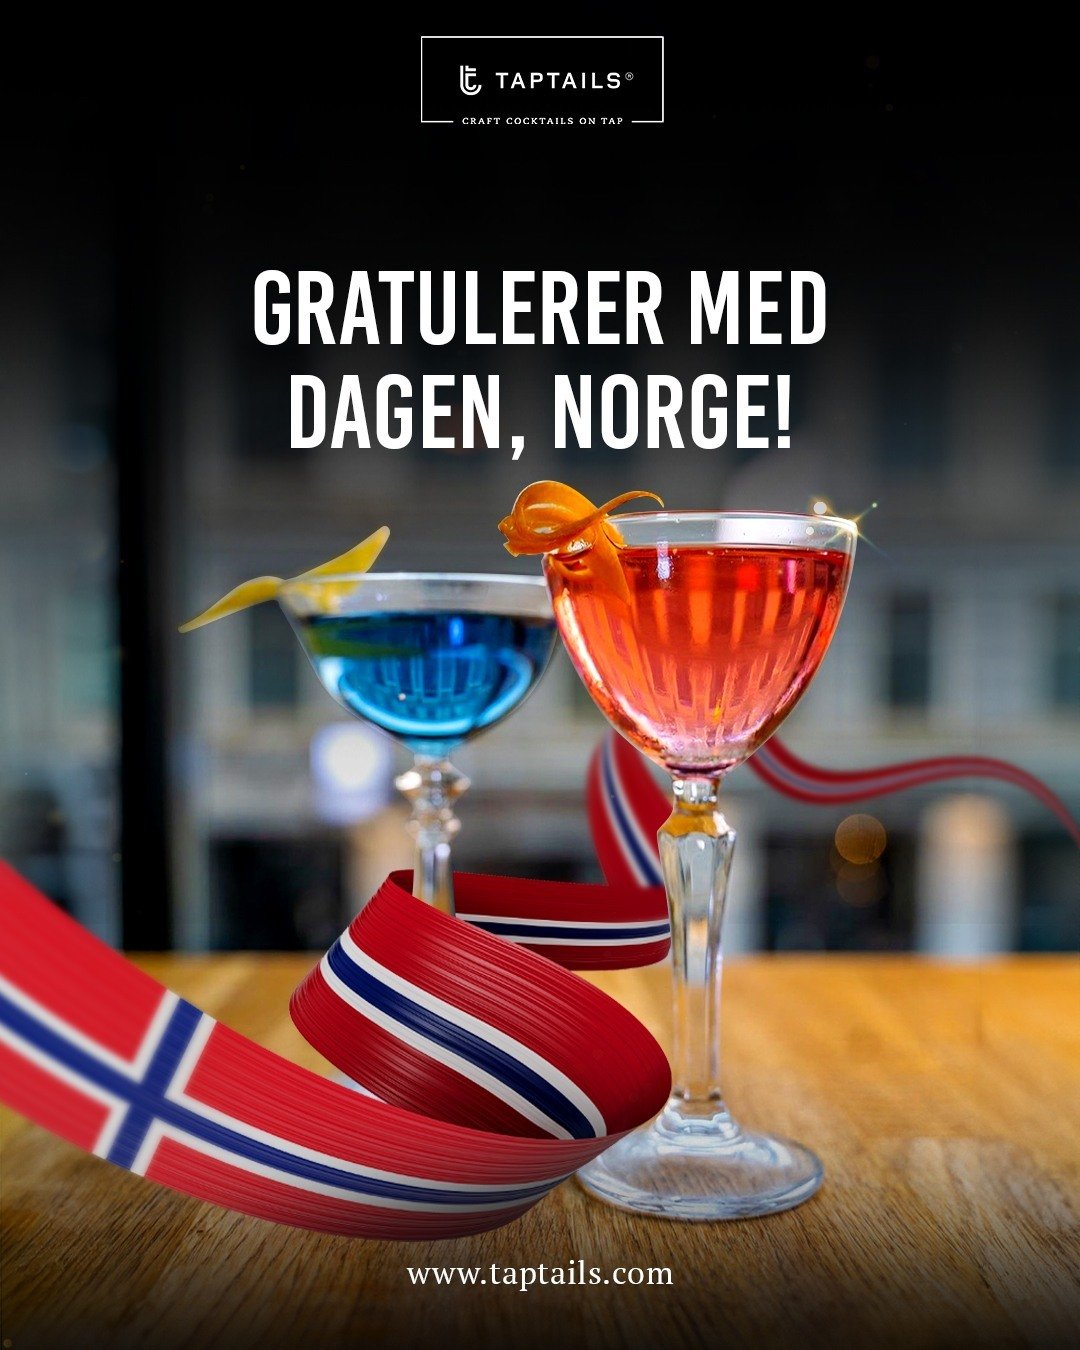 Gratulerer med dagen, Norge 🇳🇴 You look extra fine today ☀️ It's Norway's big day! Dress up, step out, and let TAPTAILS handle the drinks. Ready, set, celebrate 🍹

#taptails #cocktailsontap #cocktailsoncans #mixology #oslo #mixologist